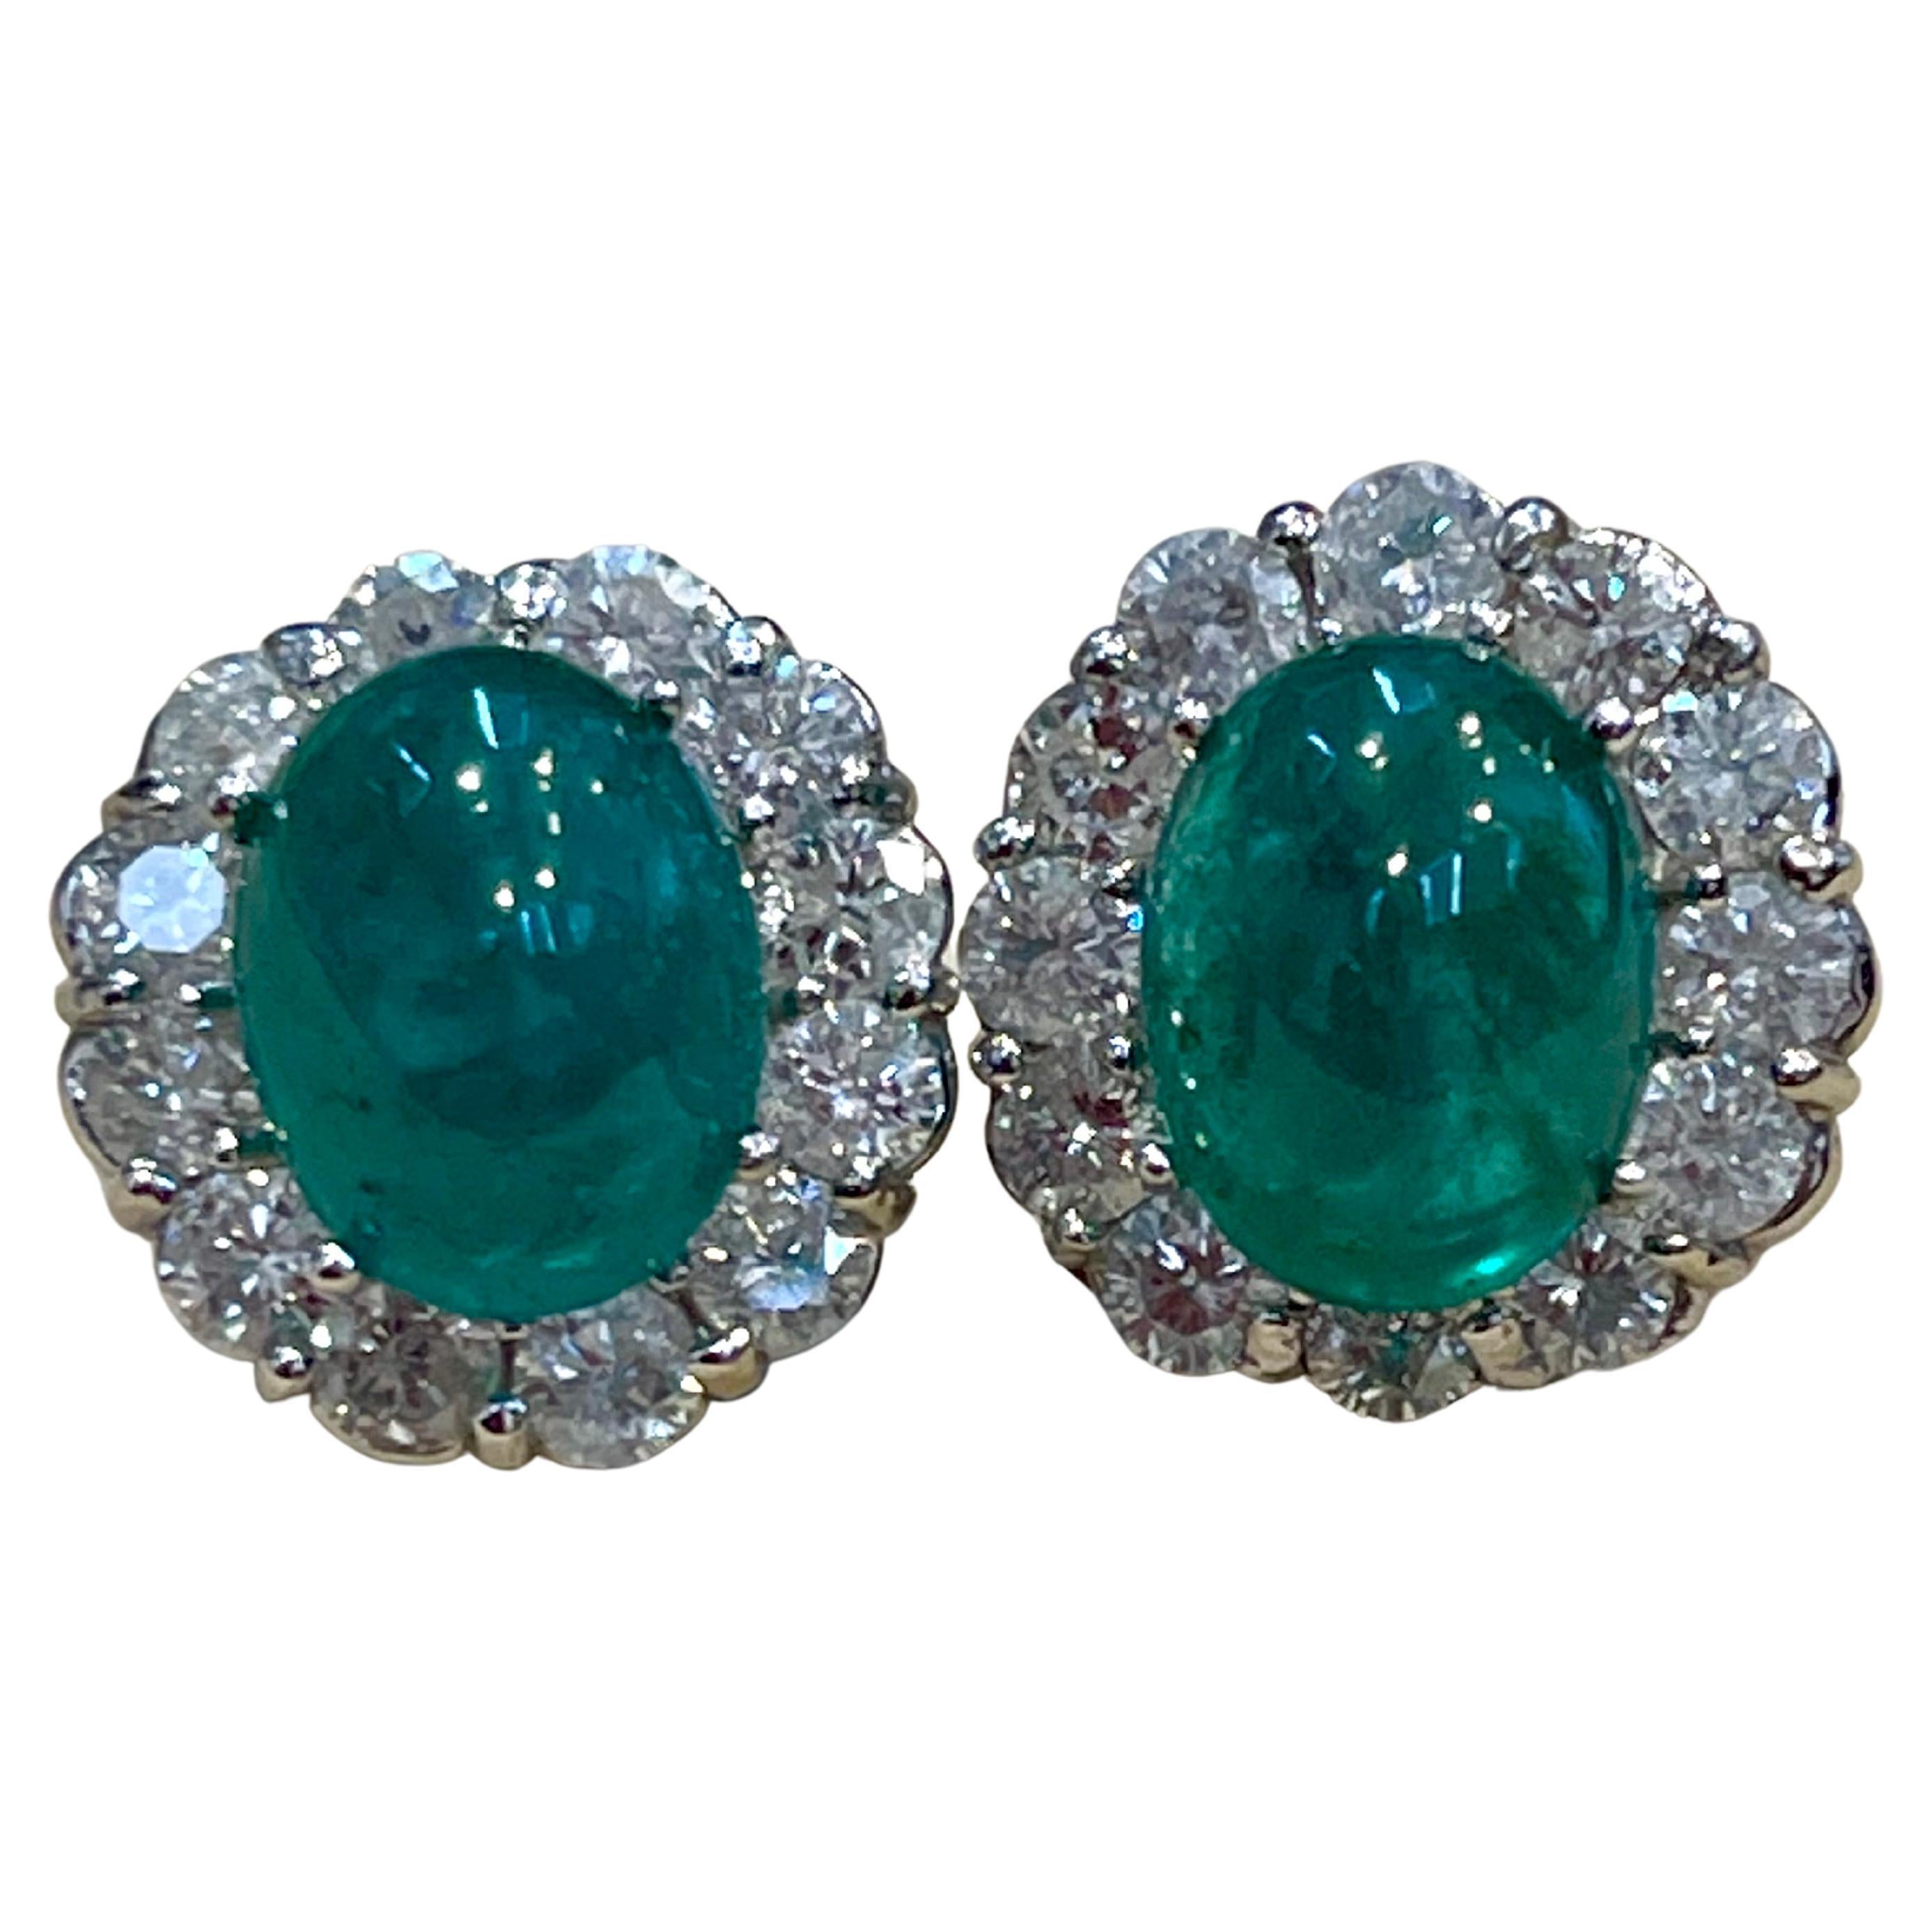 
Approximately 12  Carat of Natural Zambian Emerald Cabochon and 4 Ct diamonds  earrings in White gold

Each  Emerald Cabochon is about 6 carat 
Very desirable color and quality. Extreme fine color and clarity.
perfect matching pair made in 14 Karat